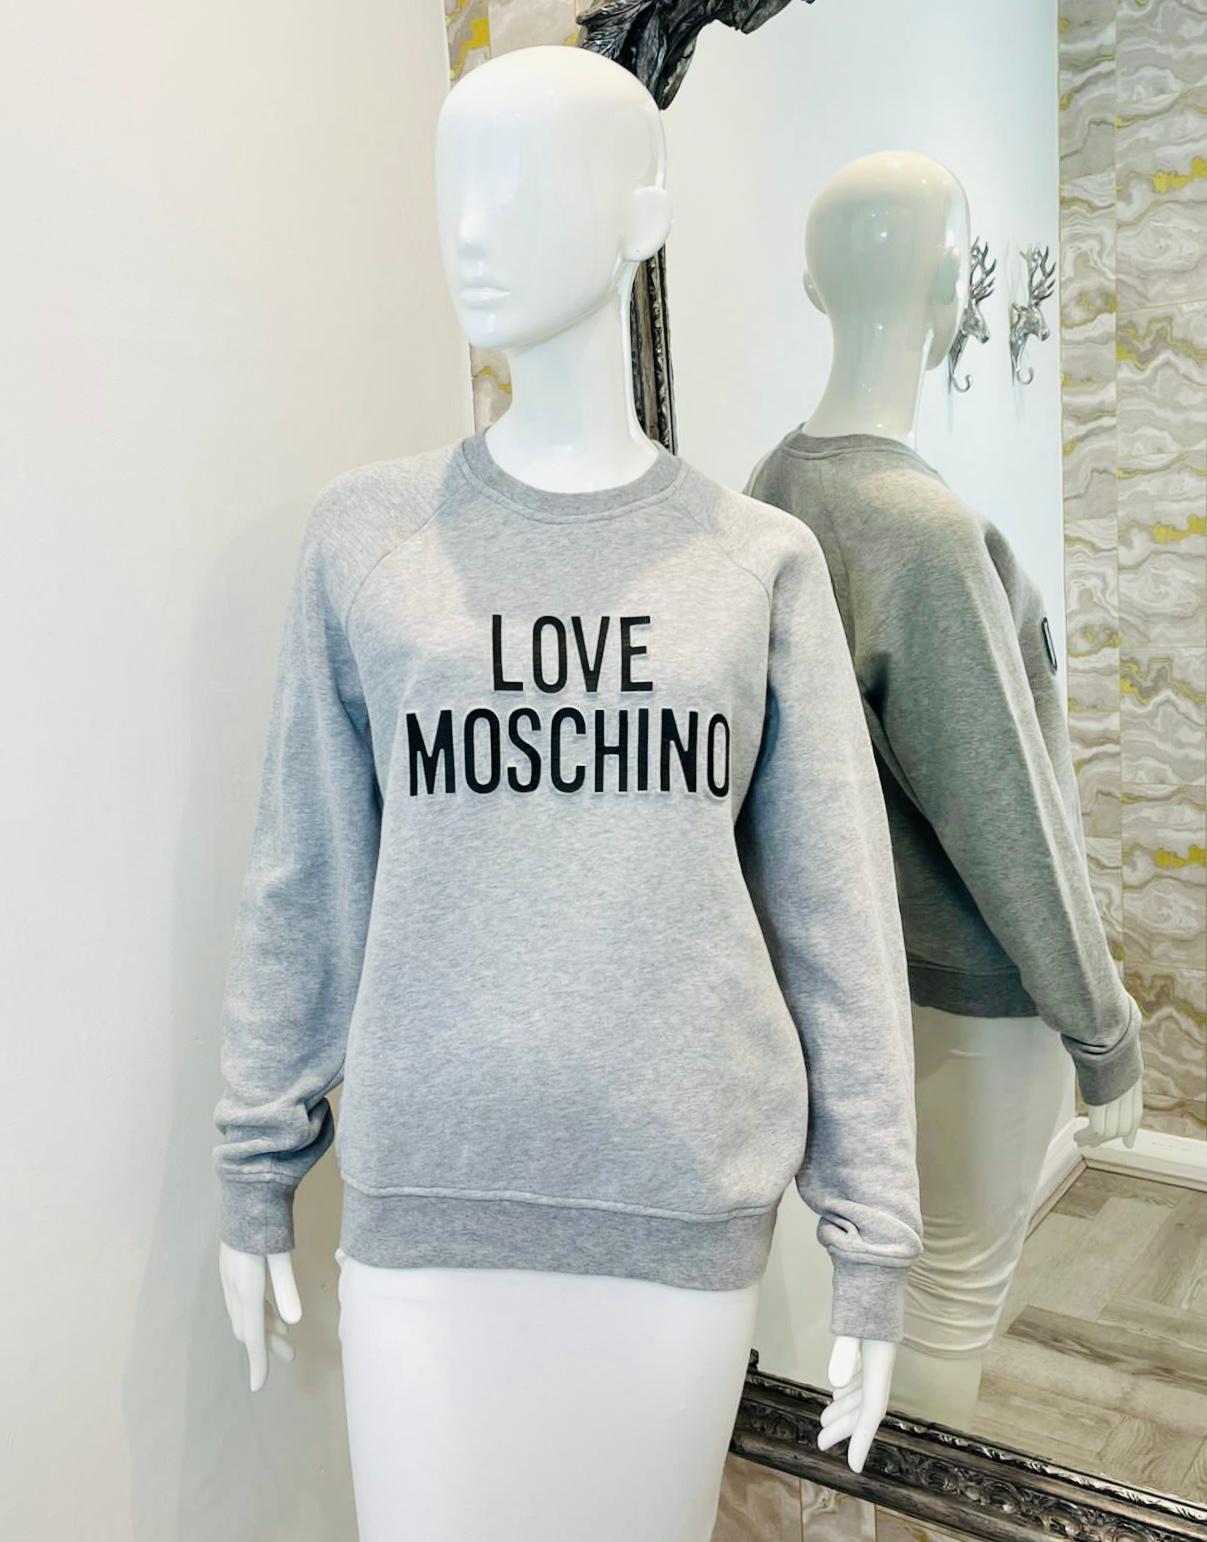 Love Moschino 'Logo' Cotton Sweatshirt

Light grey top designed with black 'Love Moschino' inscription to the front.

Featuring loose-fit silhouette, long sleeves and crew neckline.

Size – S

Condition – Very Good

Composition – 100% Cotton